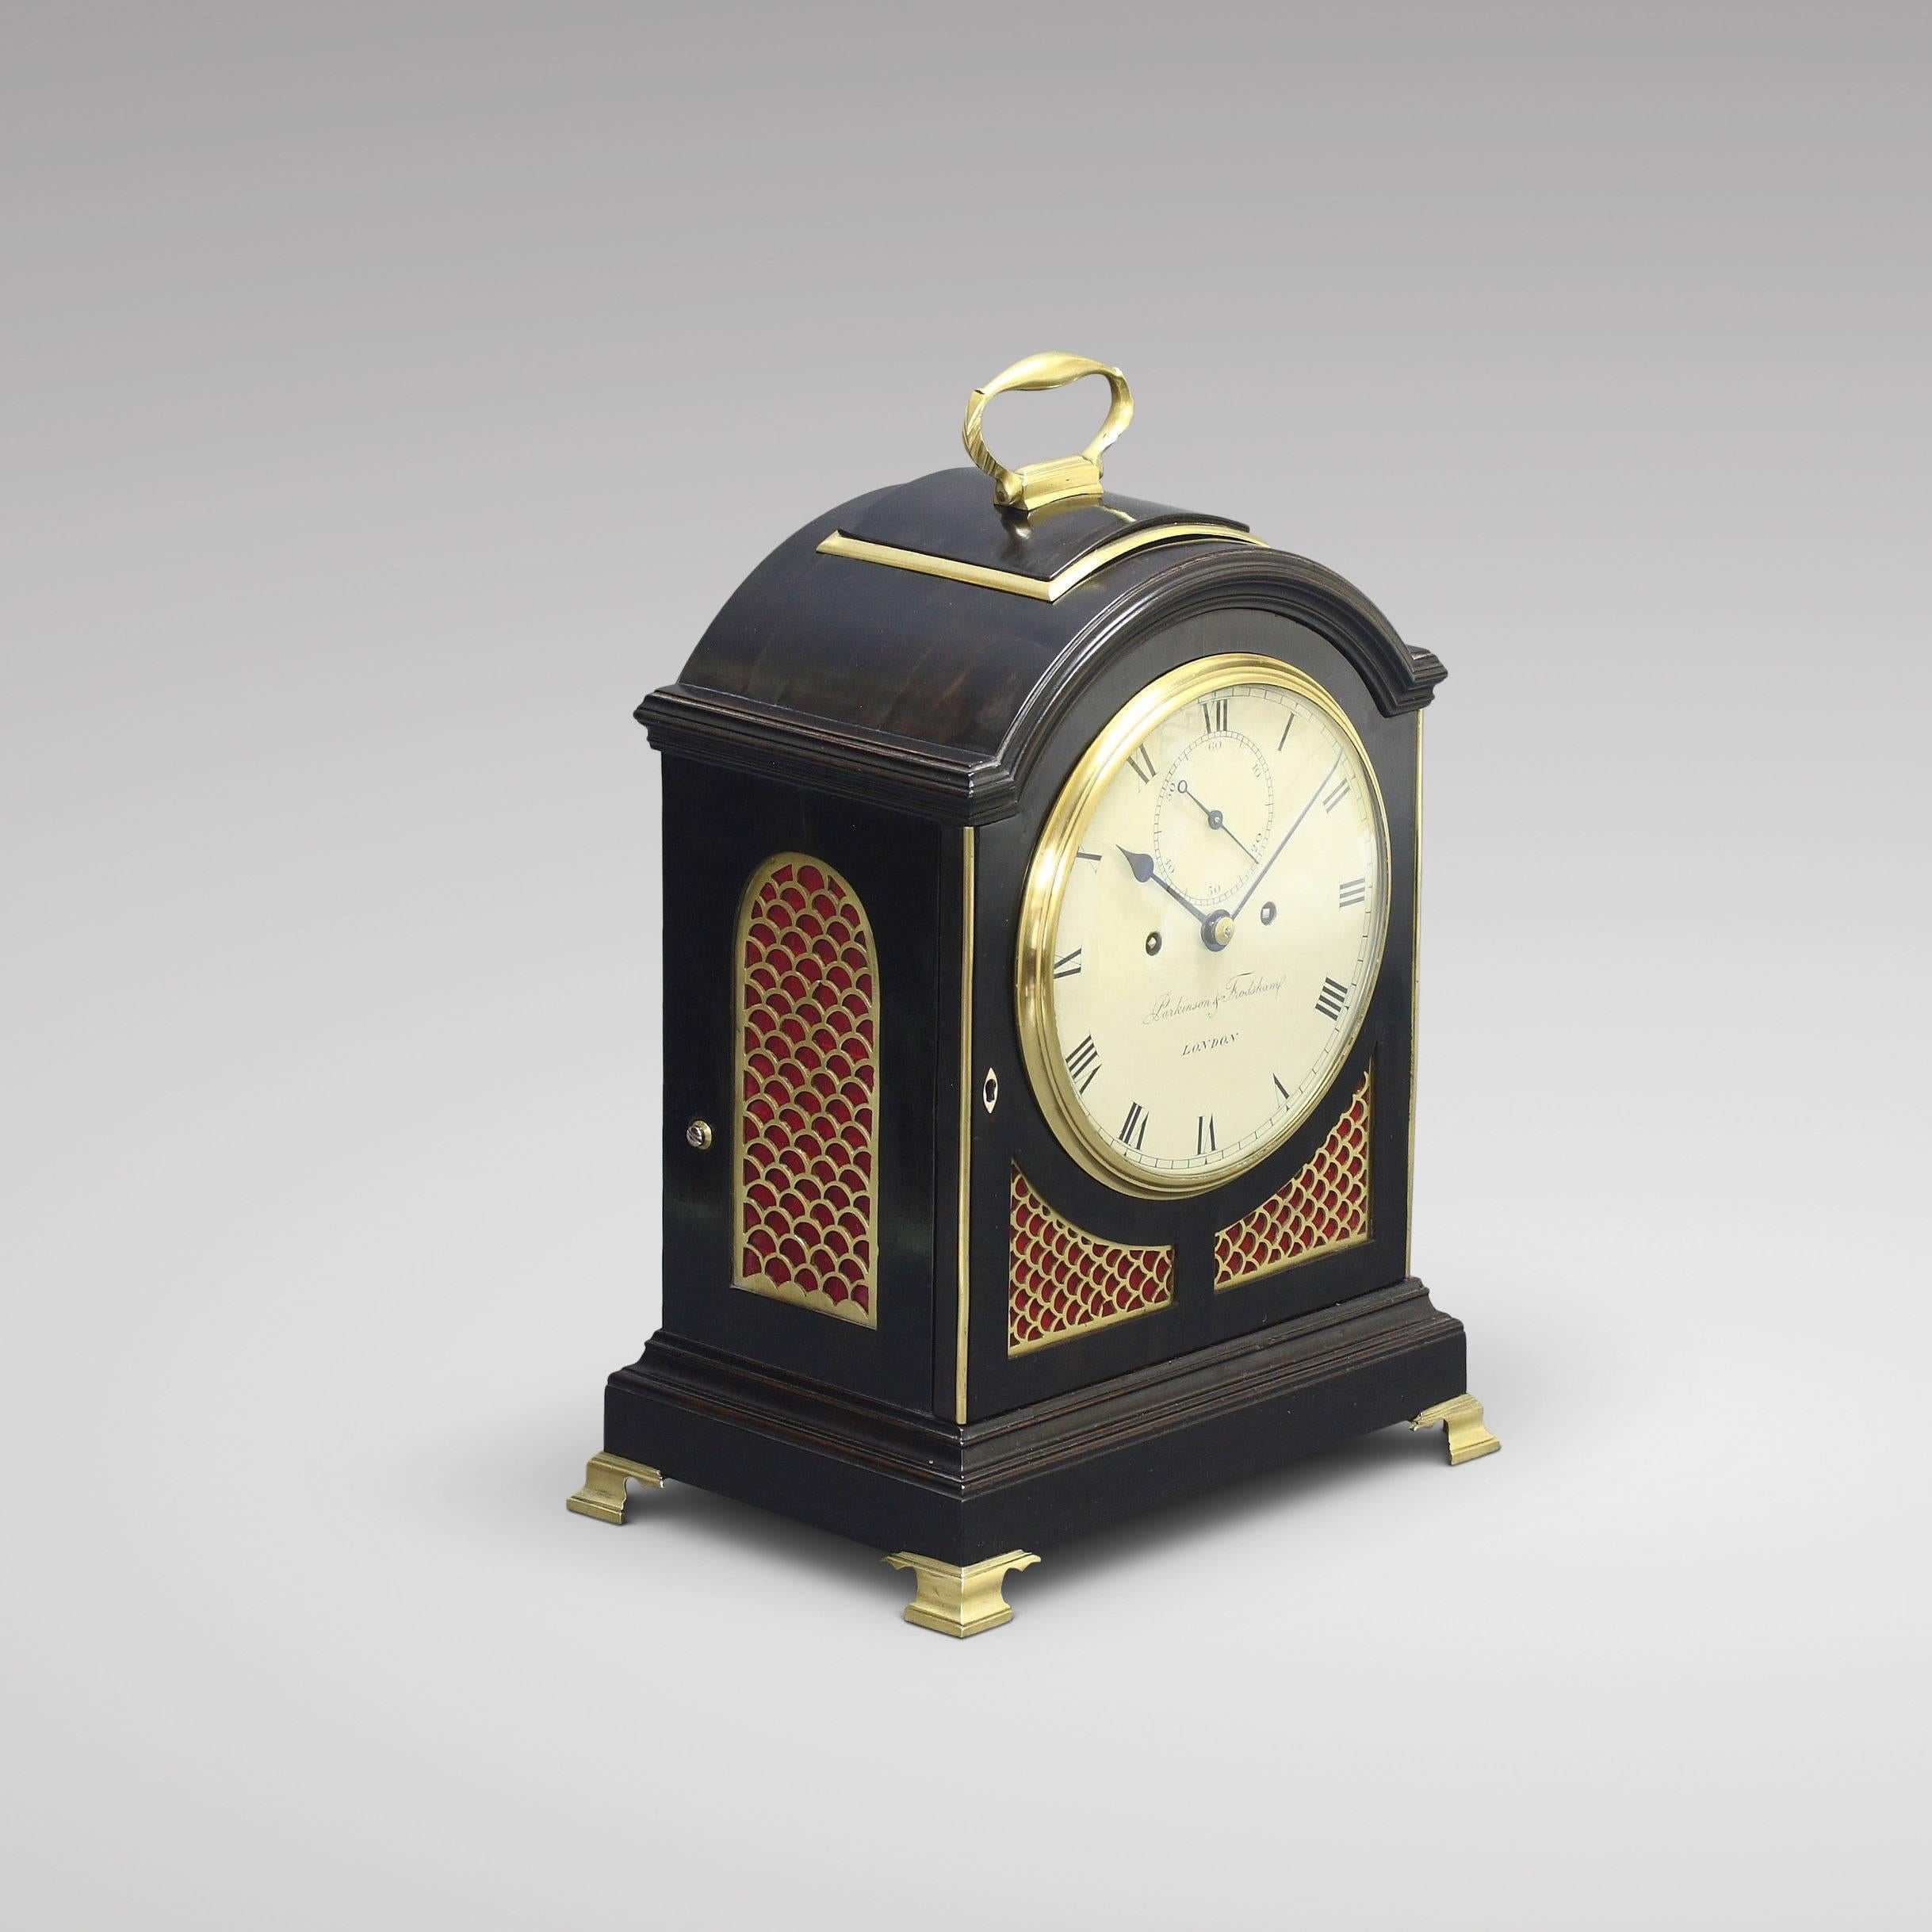 English Japanned George III-Period Precision Bracket Clock by Parkinson & Frodsham For Sale